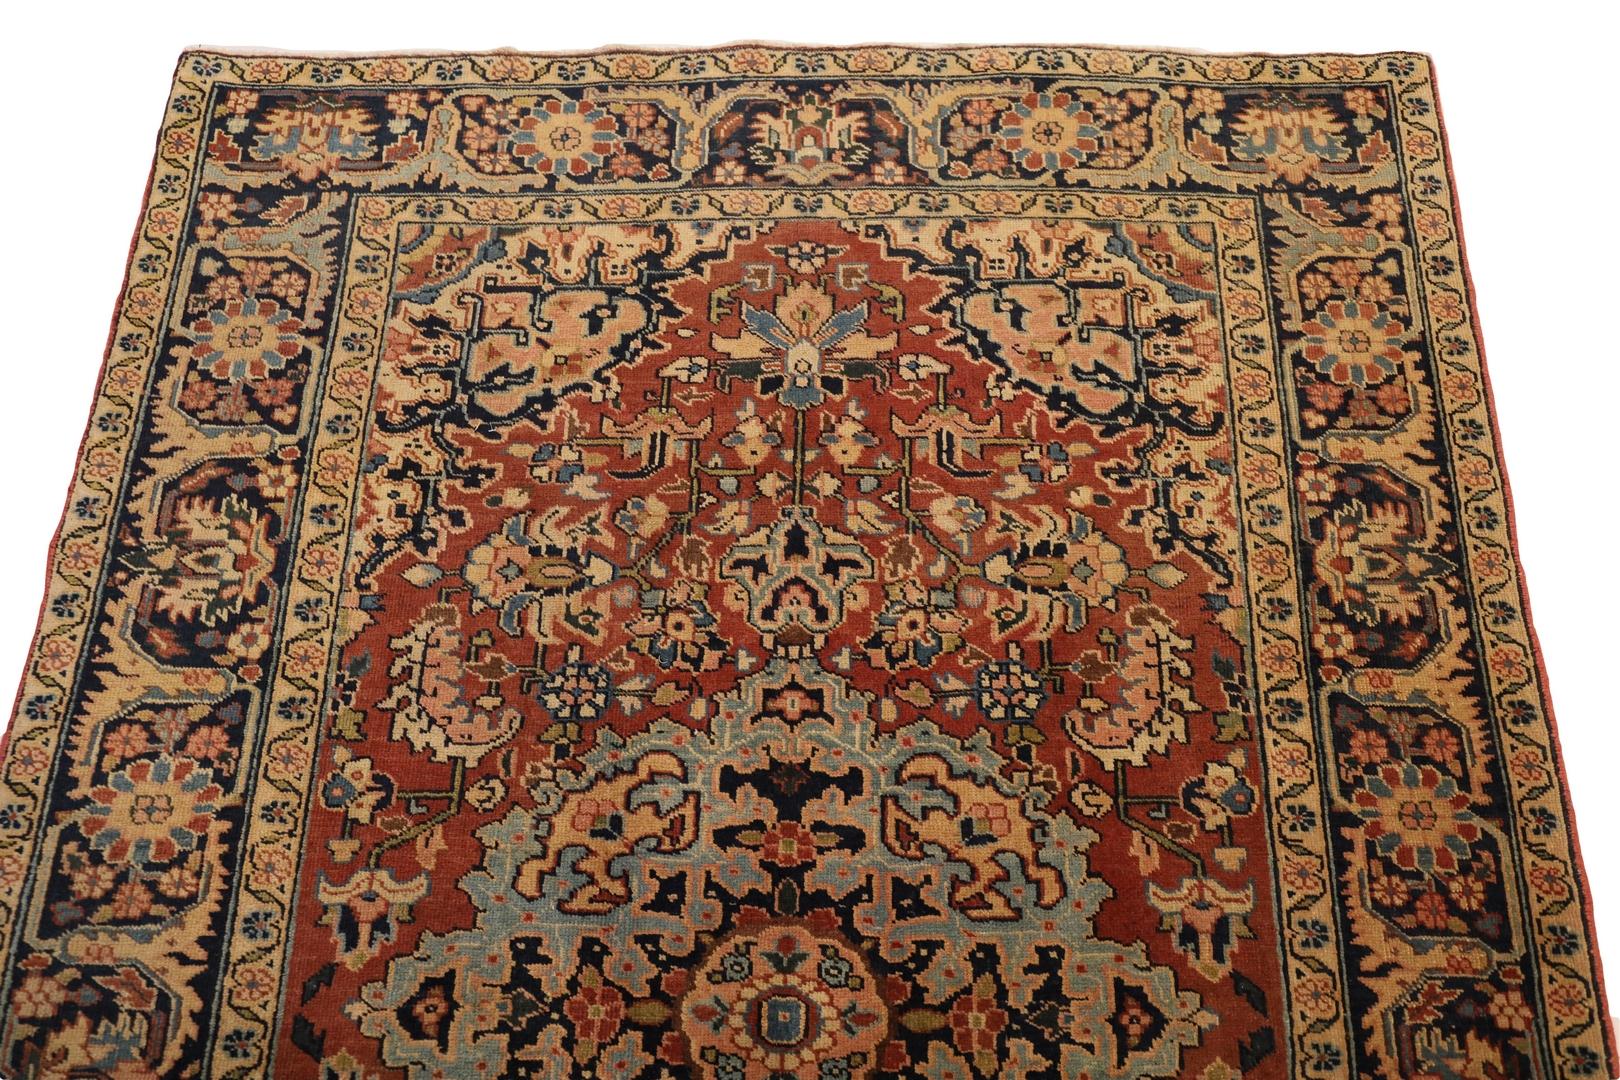 Heriz Antique Rug, Red Light-Blue Navy - 6 x 9 In Good Condition For Sale In New York, NY